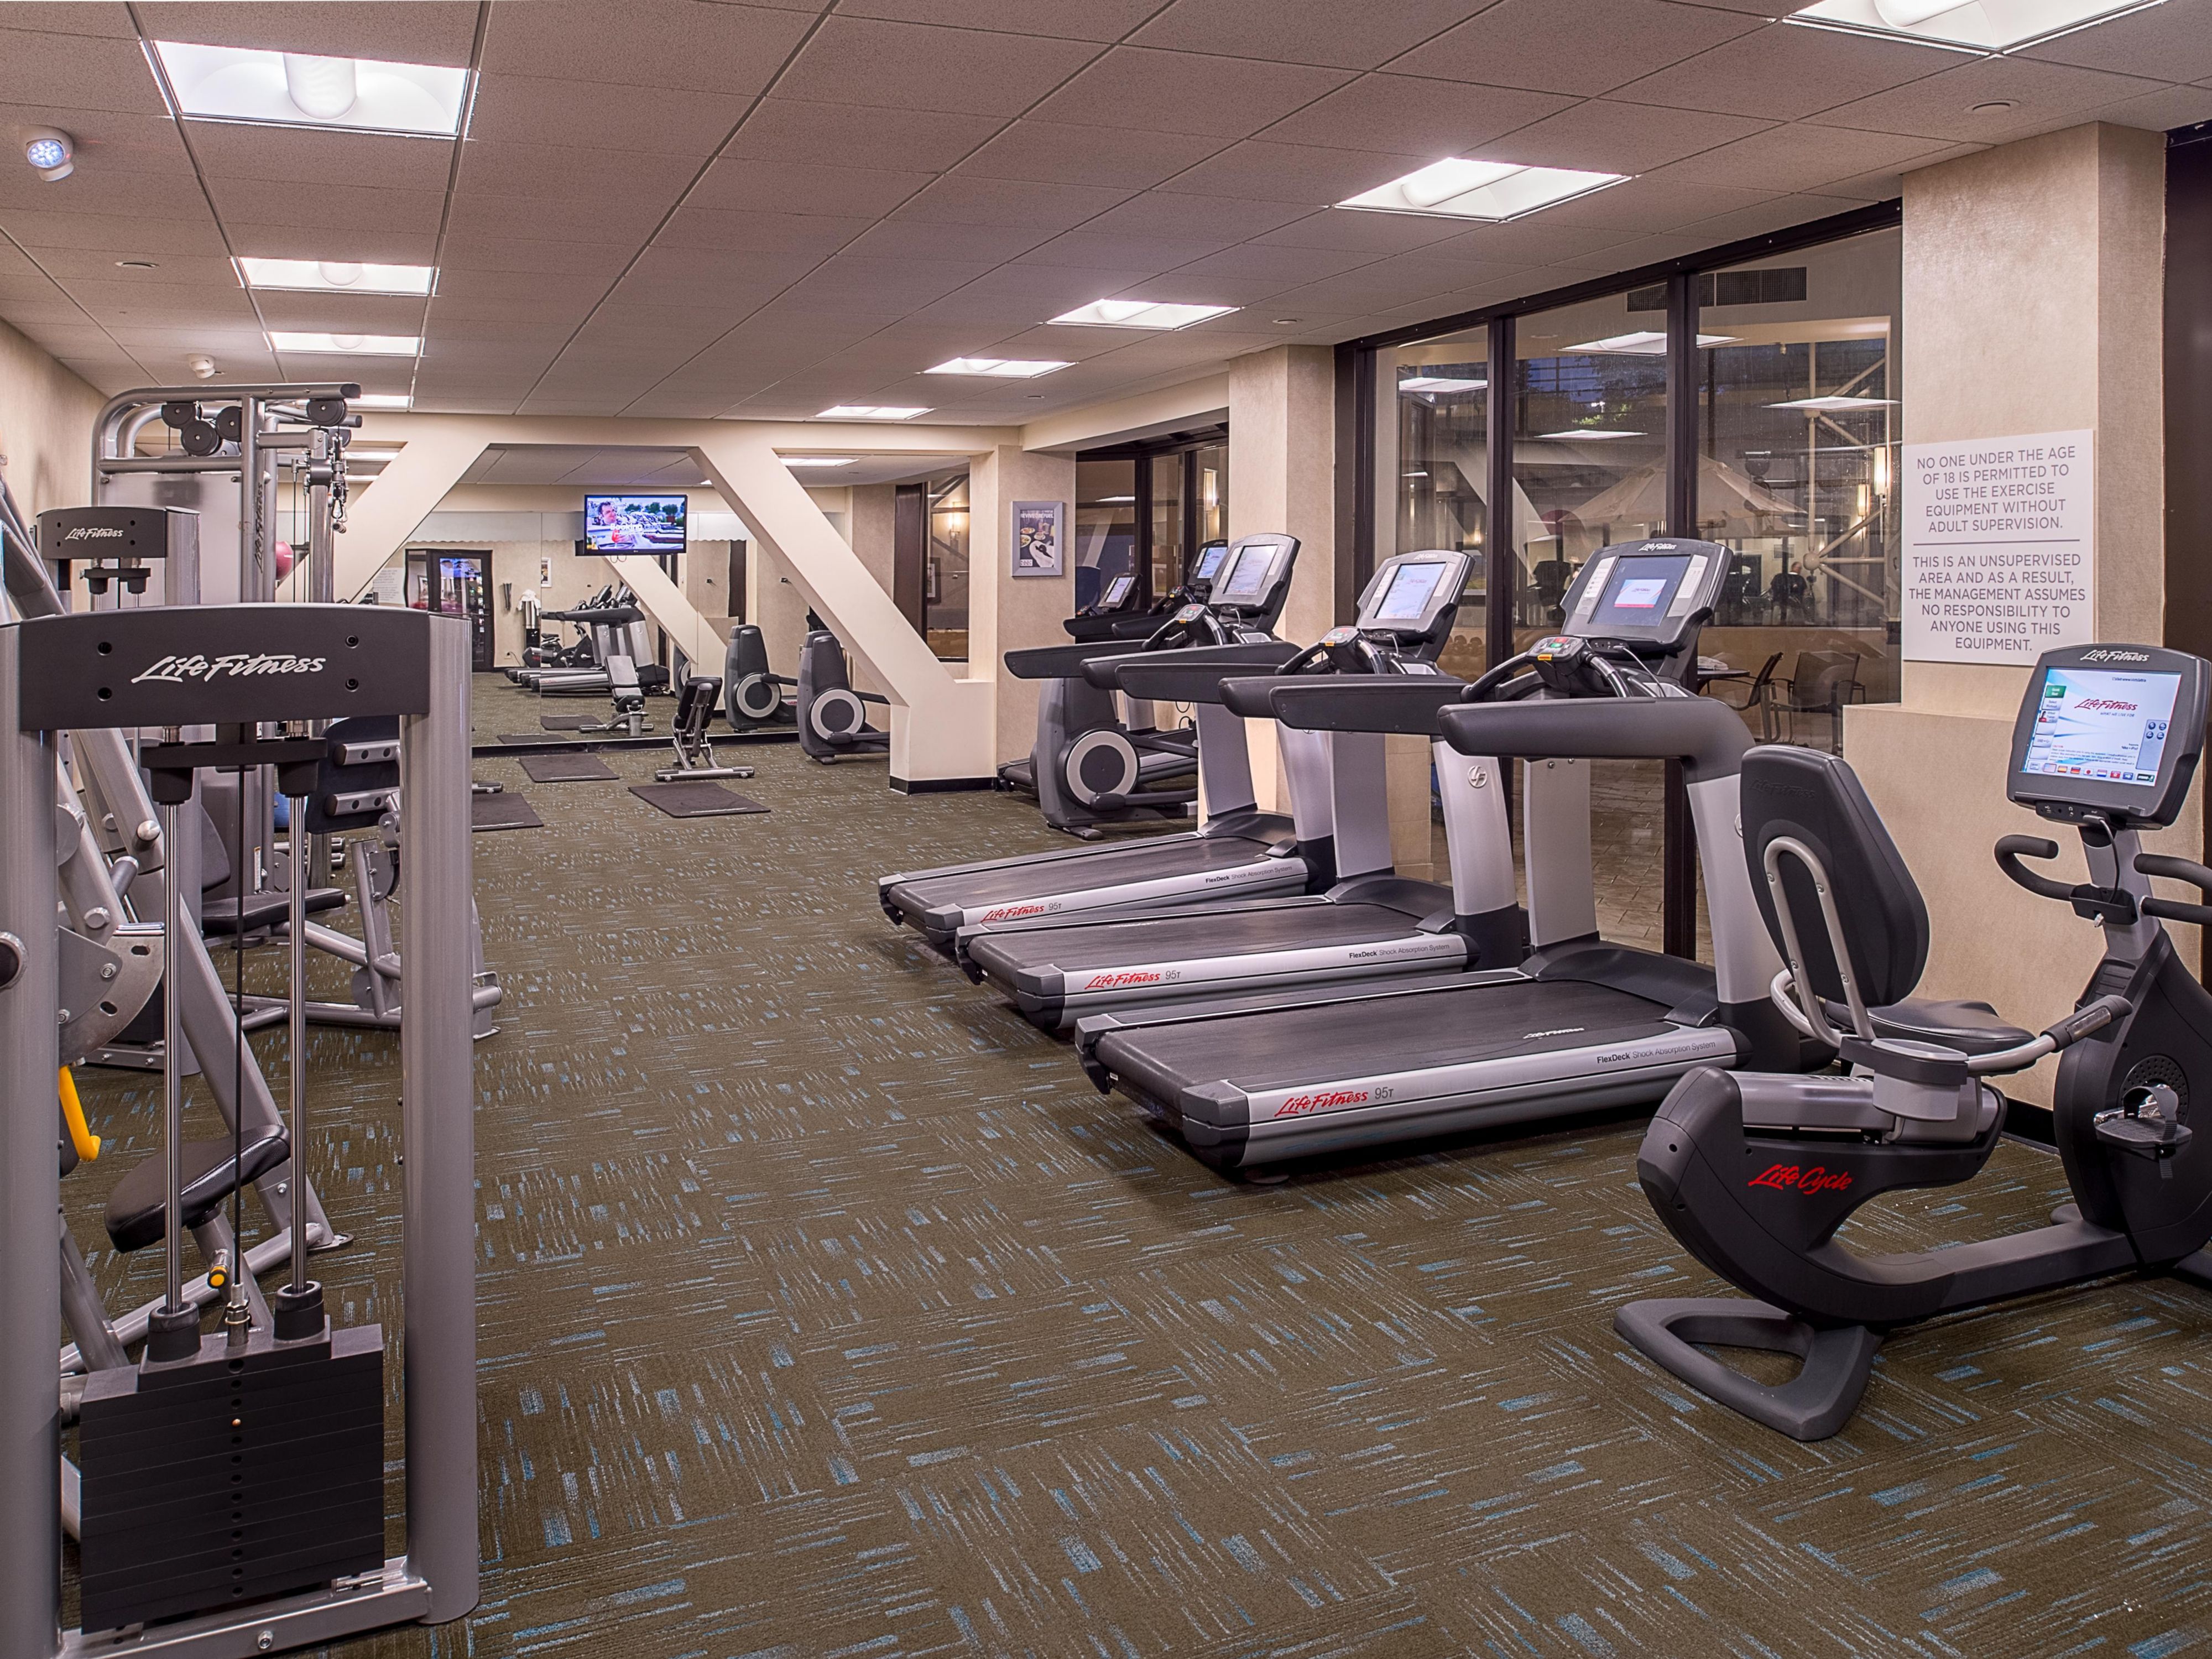 Stay on top of your fitness goals at Crowne Plaza® St. Louis Airport's fully equipped Fitness Center. Whether you prefer cardio or weight training, our gym has everything you need to stay fit and healthy during your stay. With state-of-the-art equipment and a welcoming atmosphere, you'll be able to work out comfortably and confidently. 